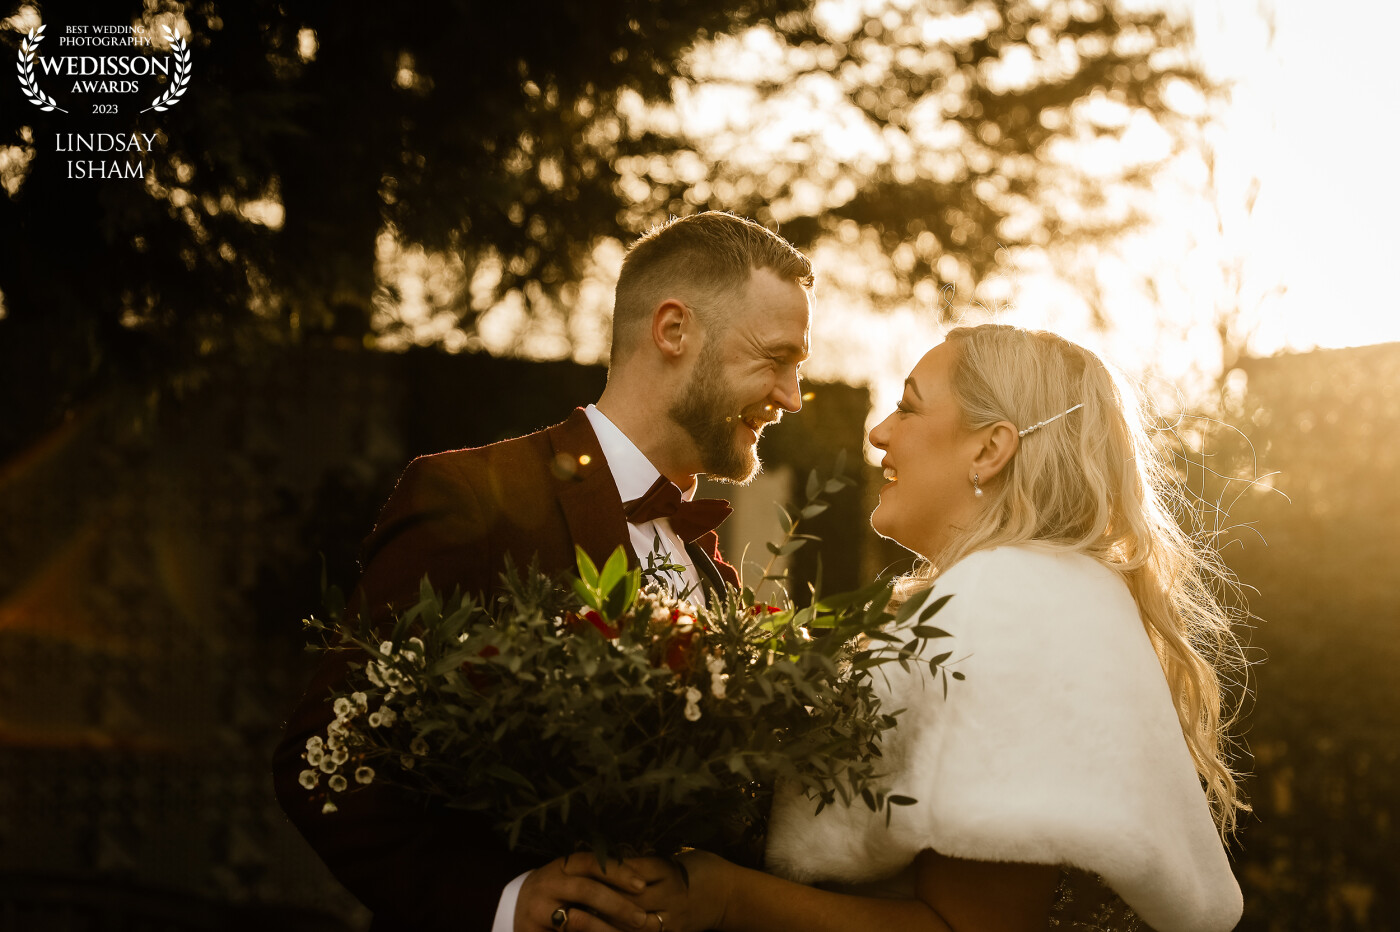 This was such a poignant day for Lauren and Callum.  Captured during a beautiful golden hour at San Pietro in Scunthorpe, these two could not stop smiling on their special day.  It was a joy to be part of!